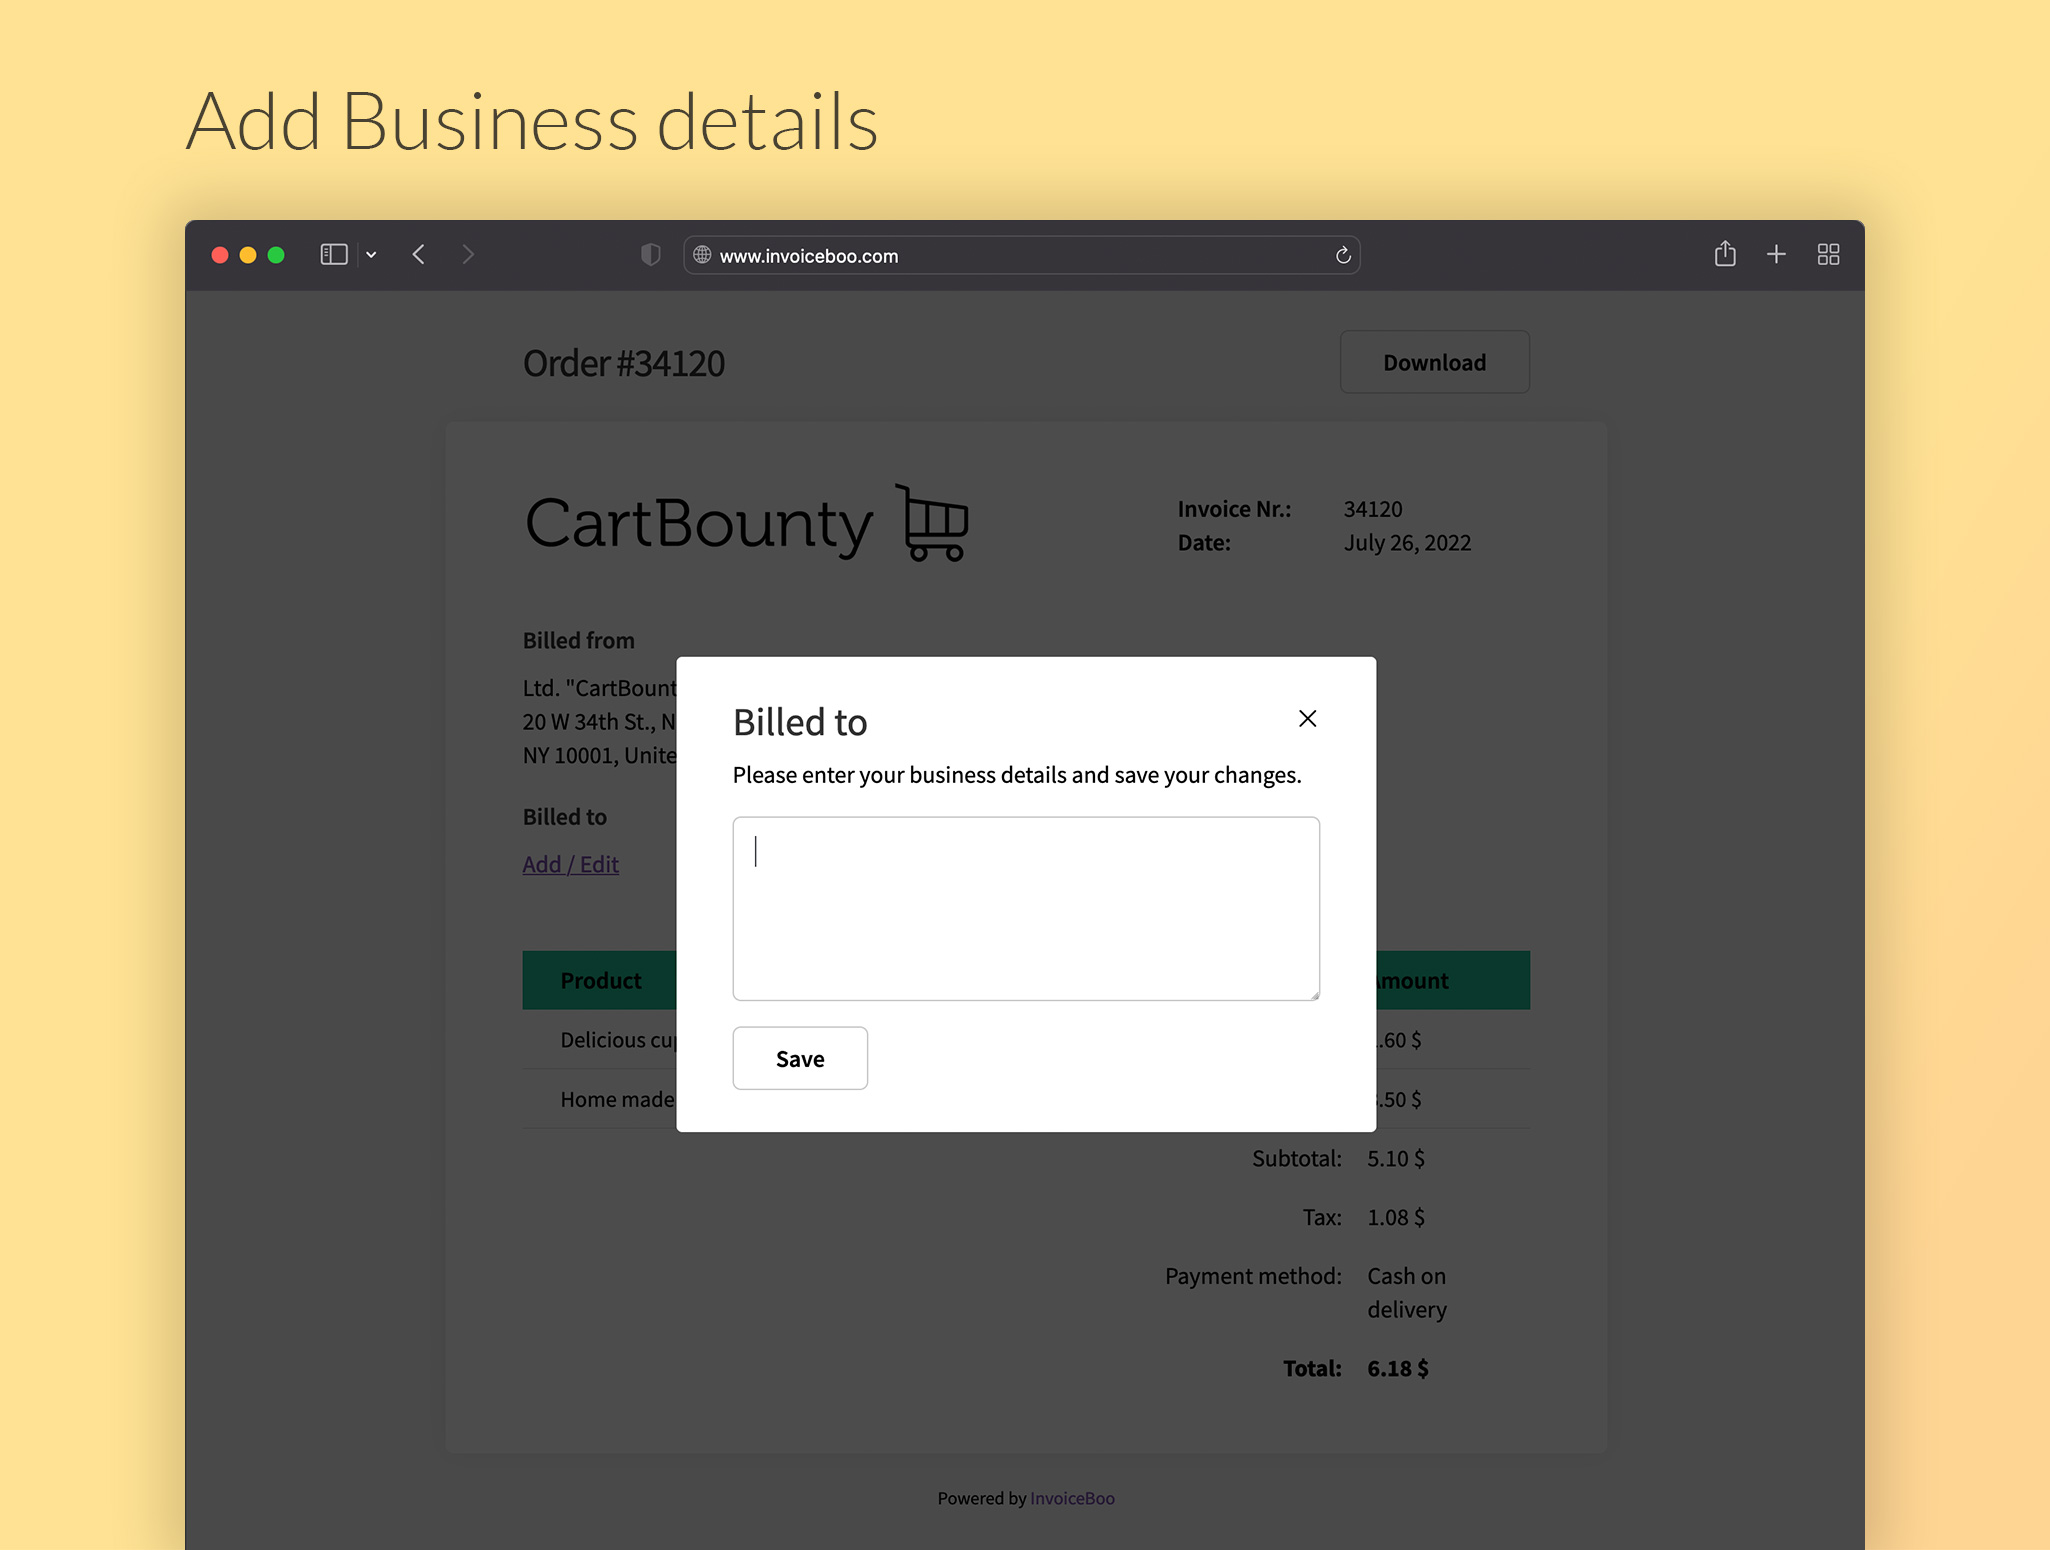 Add Business details to Invoice after placing the order